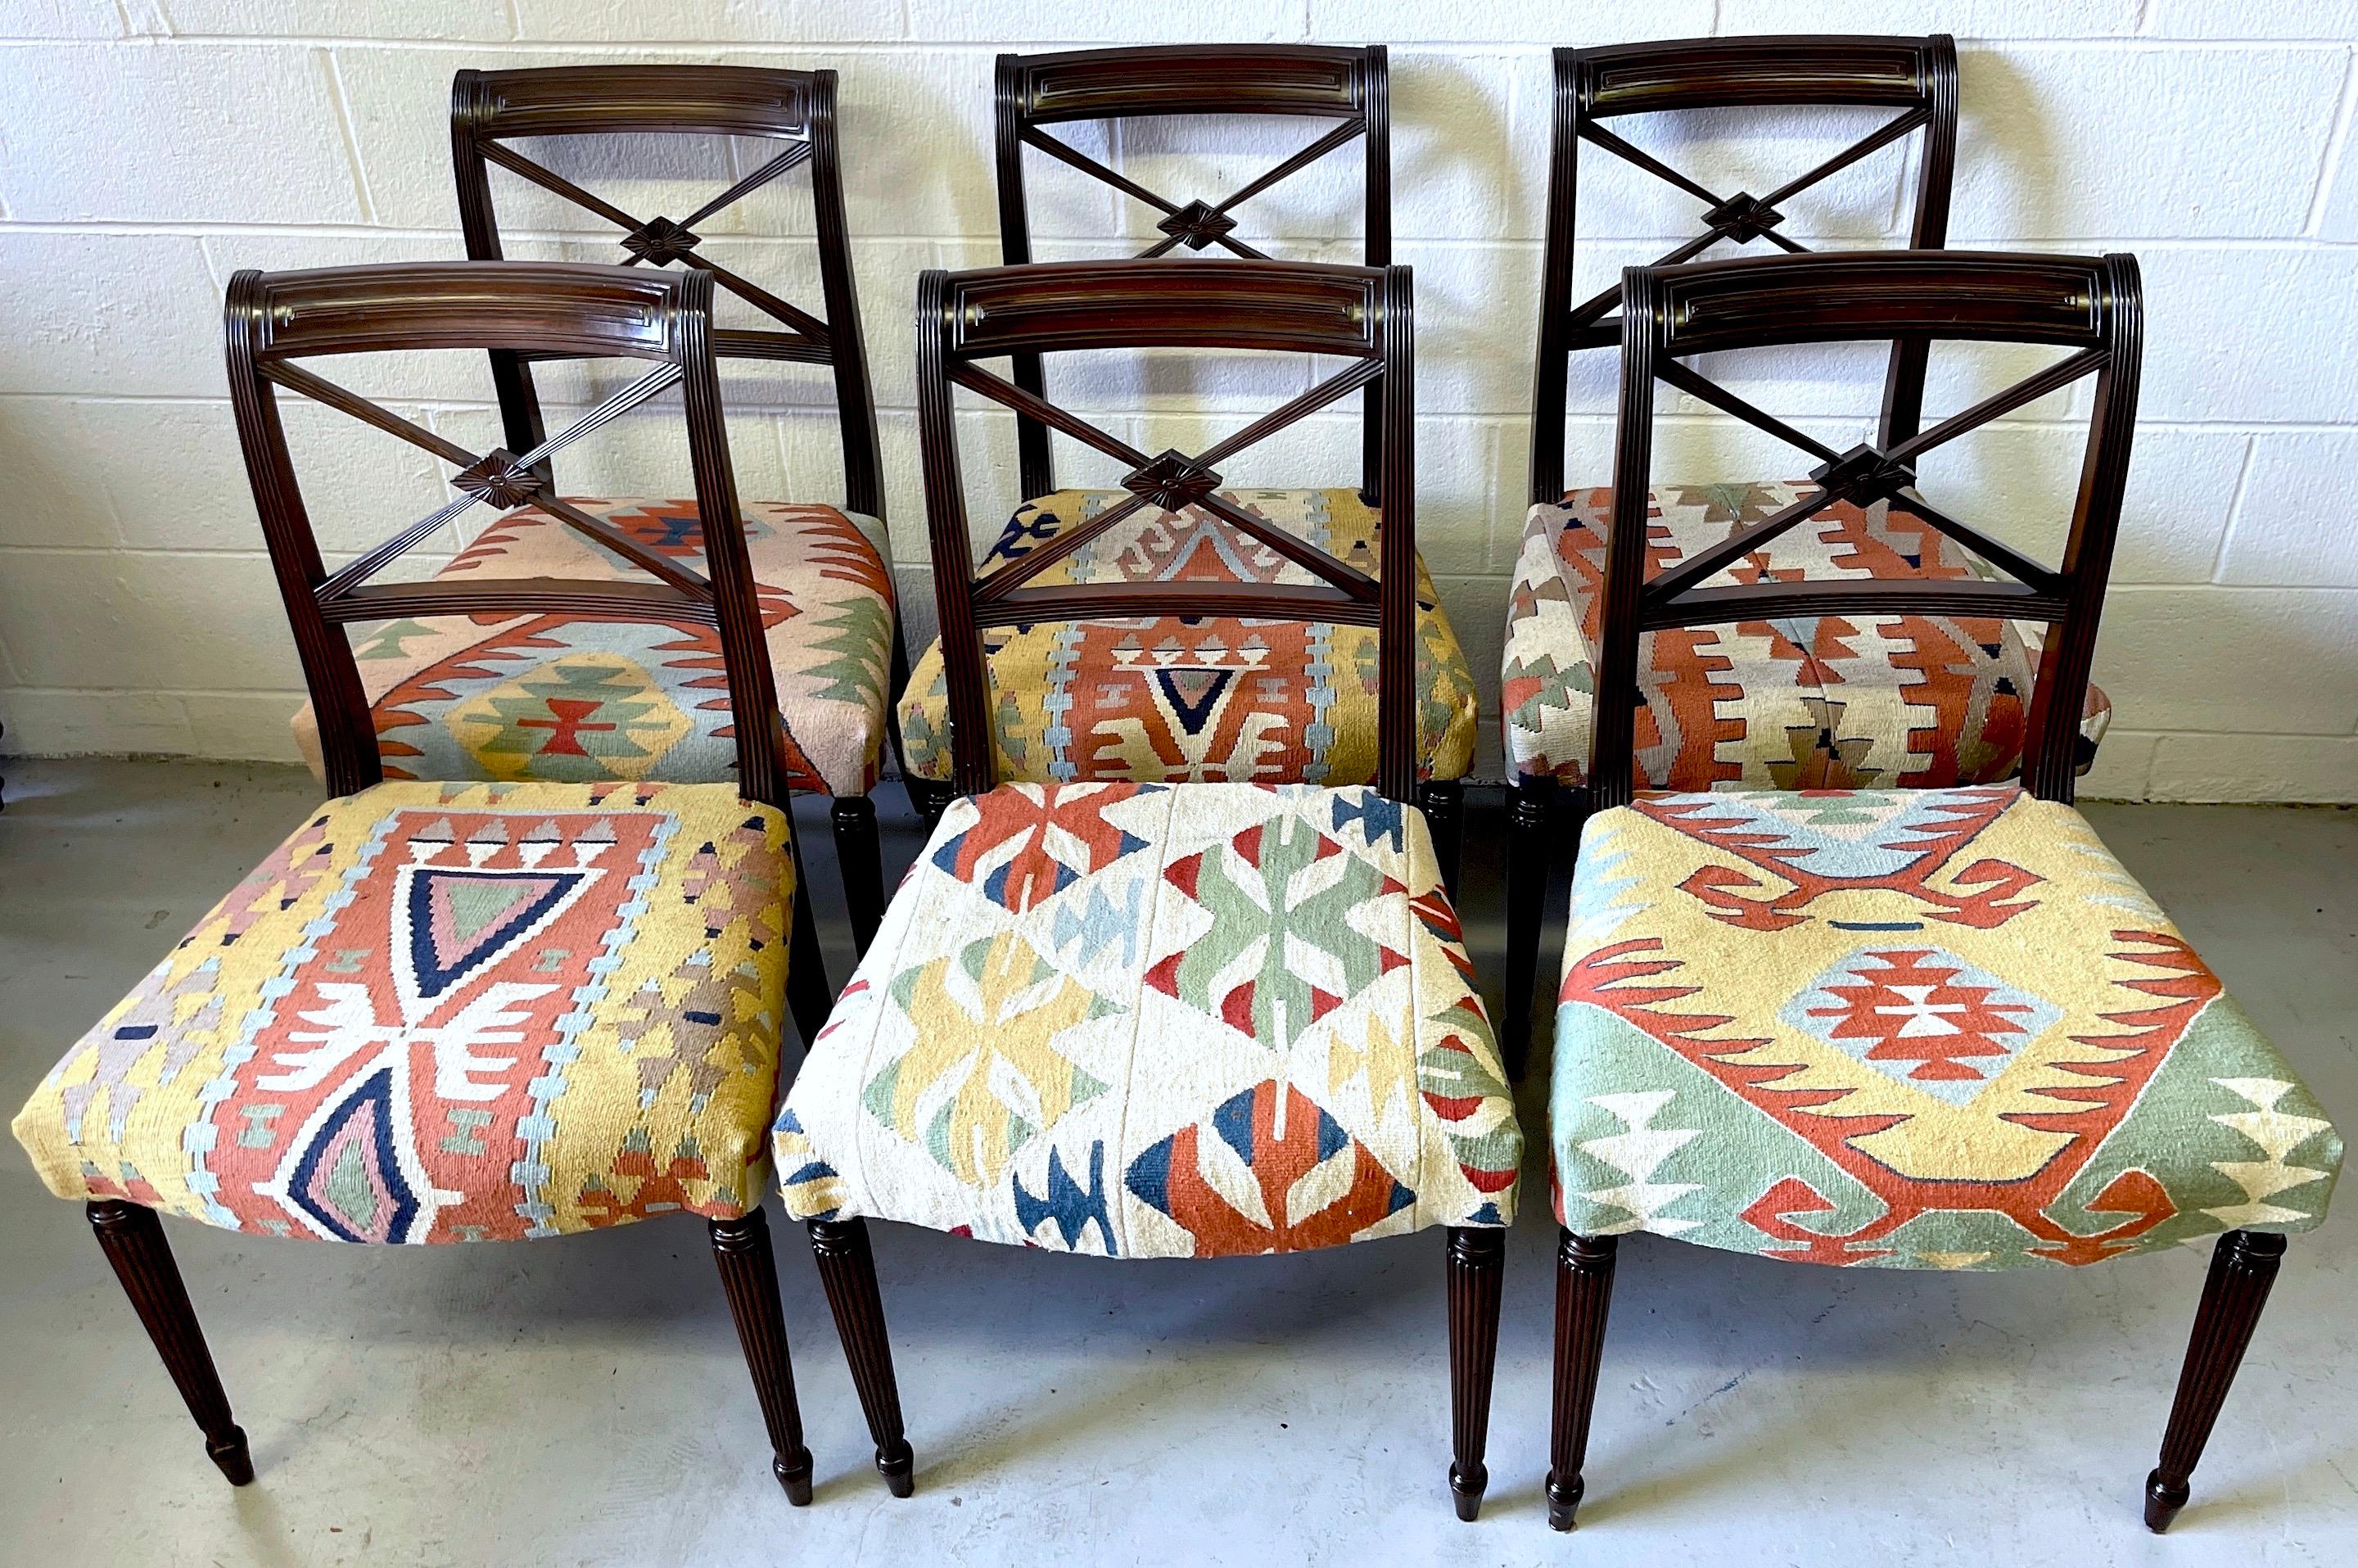 Set of 6 English Regency style carved mahogany & Kilim upholstered chairs 
England, Circa 1920s, the upholstery, Turkey, 1960s 

A rare find, a set of six well carved English Regency style chairs.
Each chair with a fine restrained Neoclassical